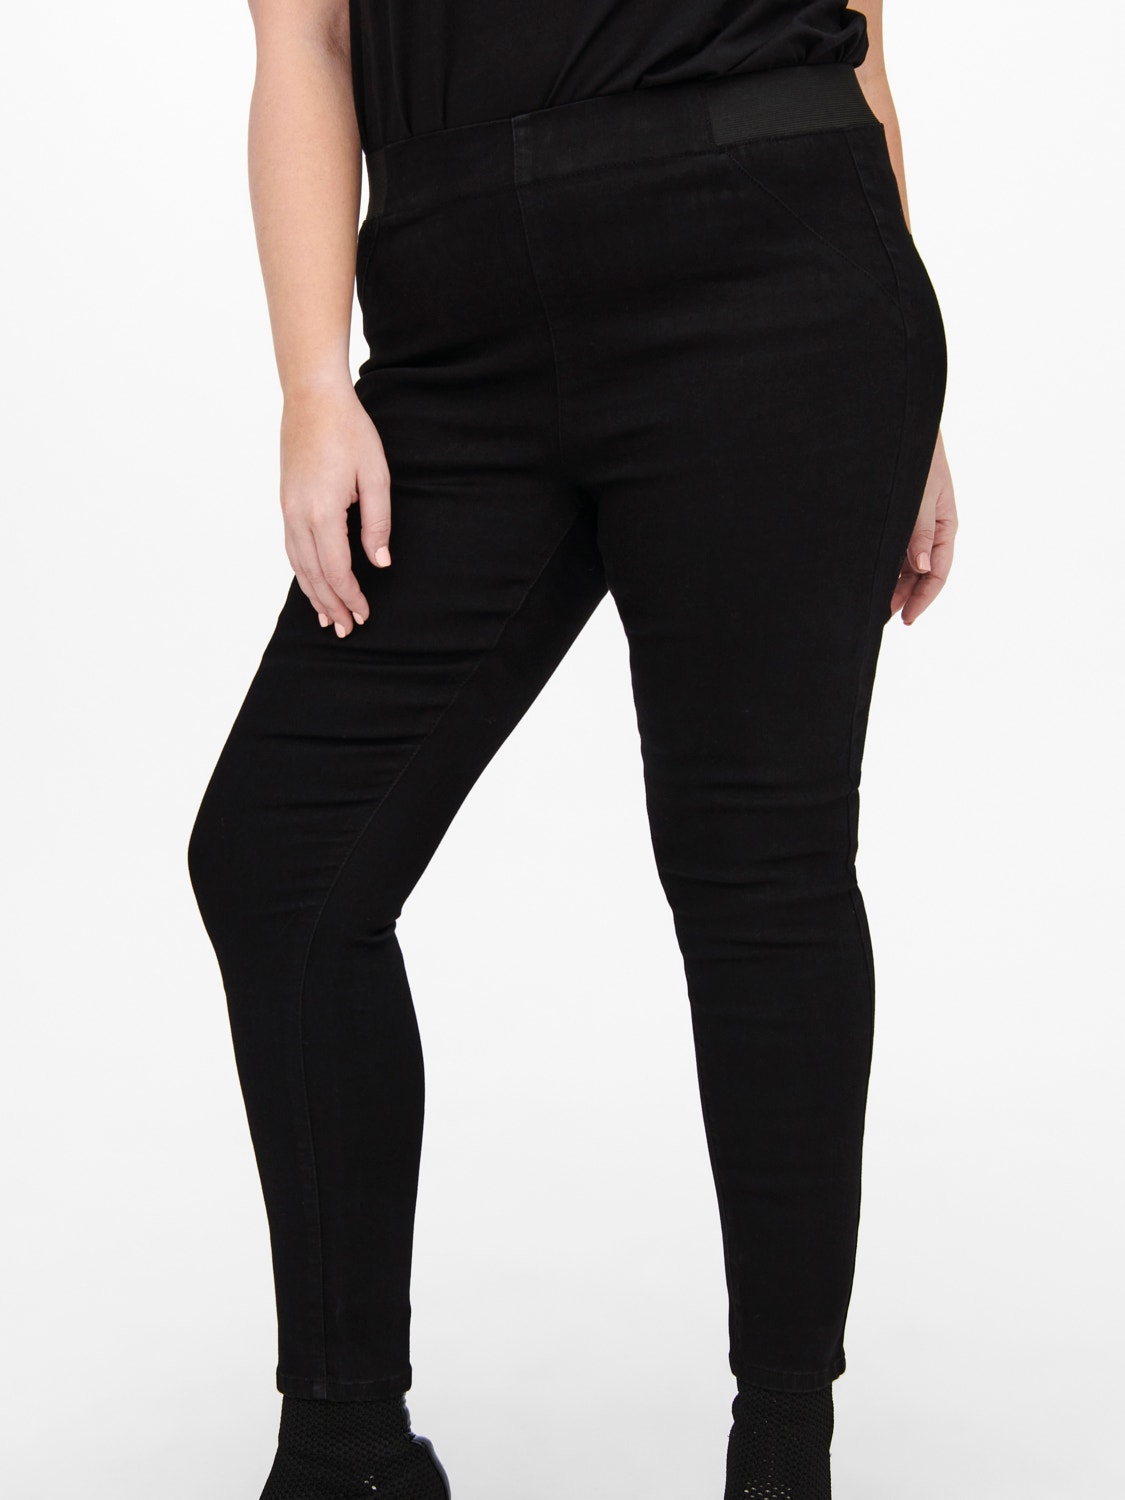 ONLY CARSally high-waist Skinny jeans -Black - 15256289